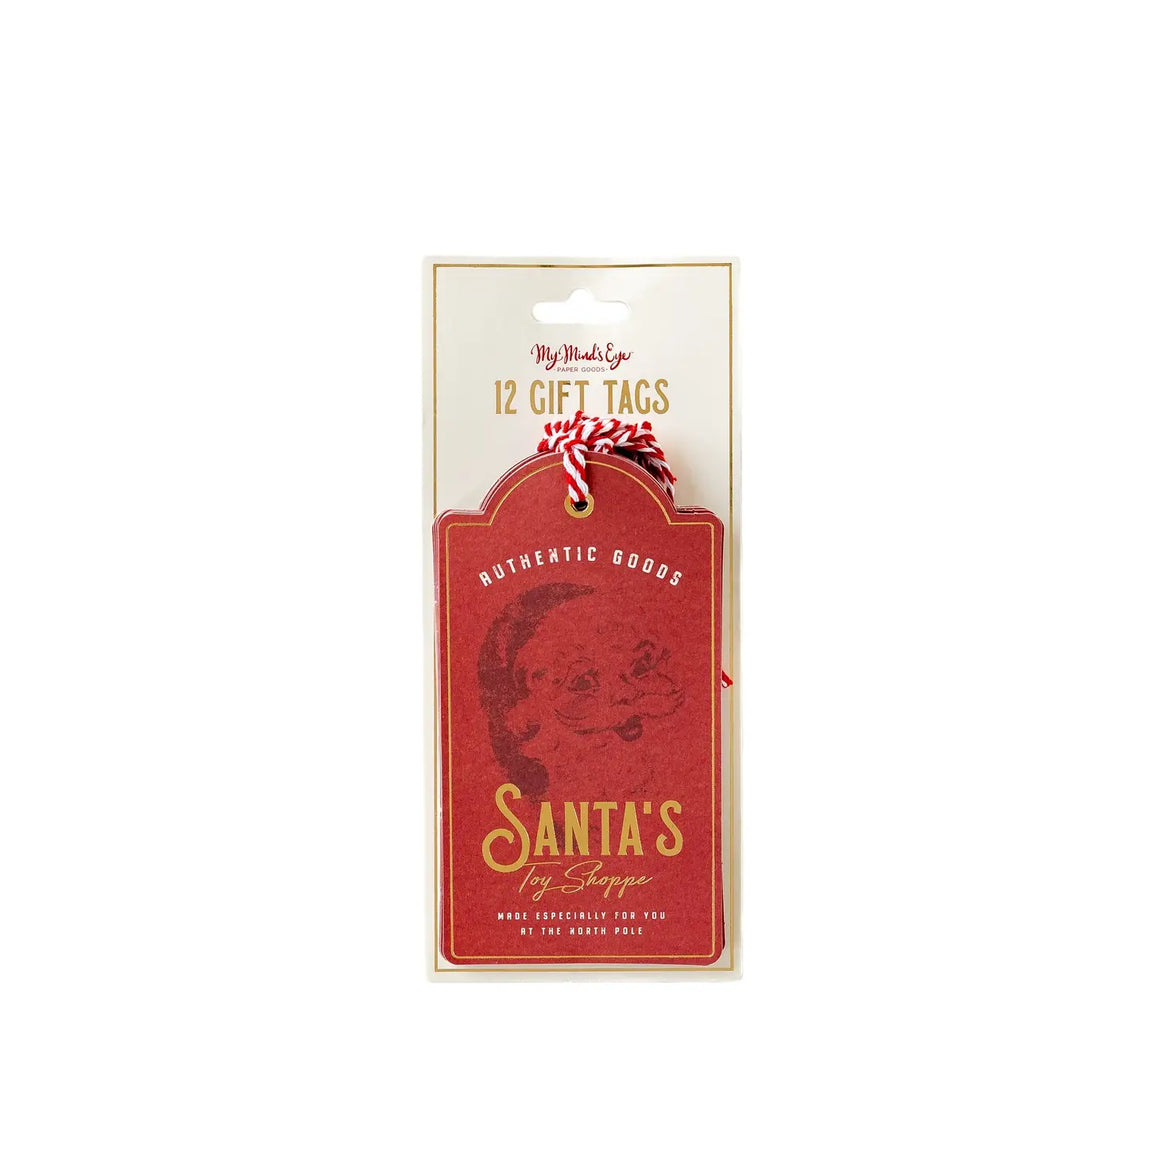 GIFT TAGS - SMILING SANTA OVERSIZED TAGS